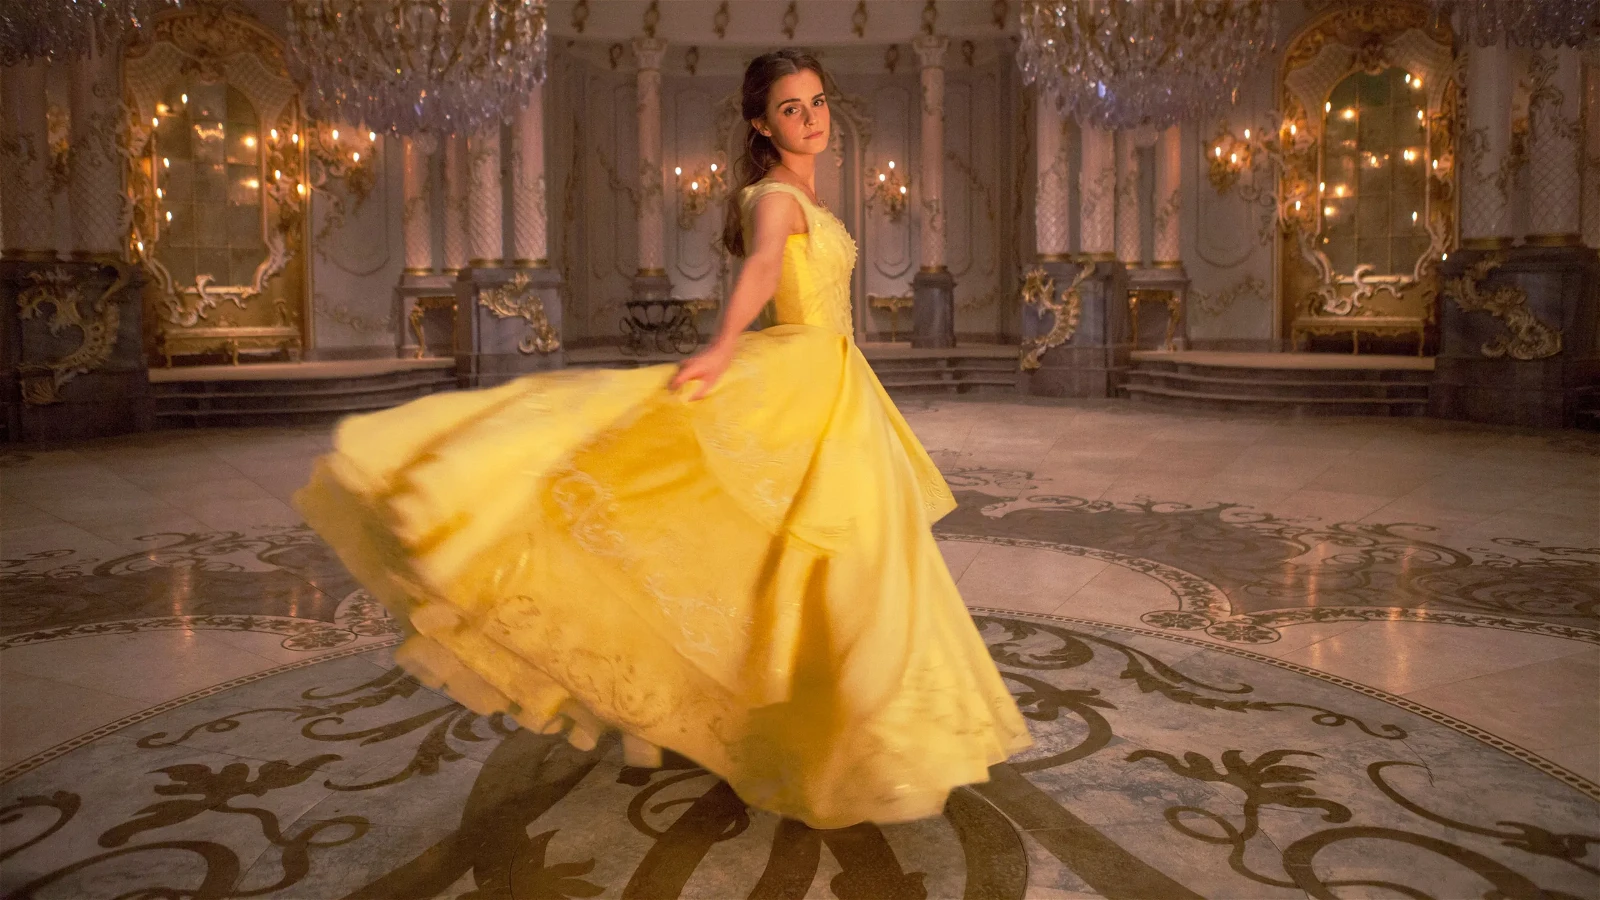 Emma Watson in Beauty and the Beast (2017).